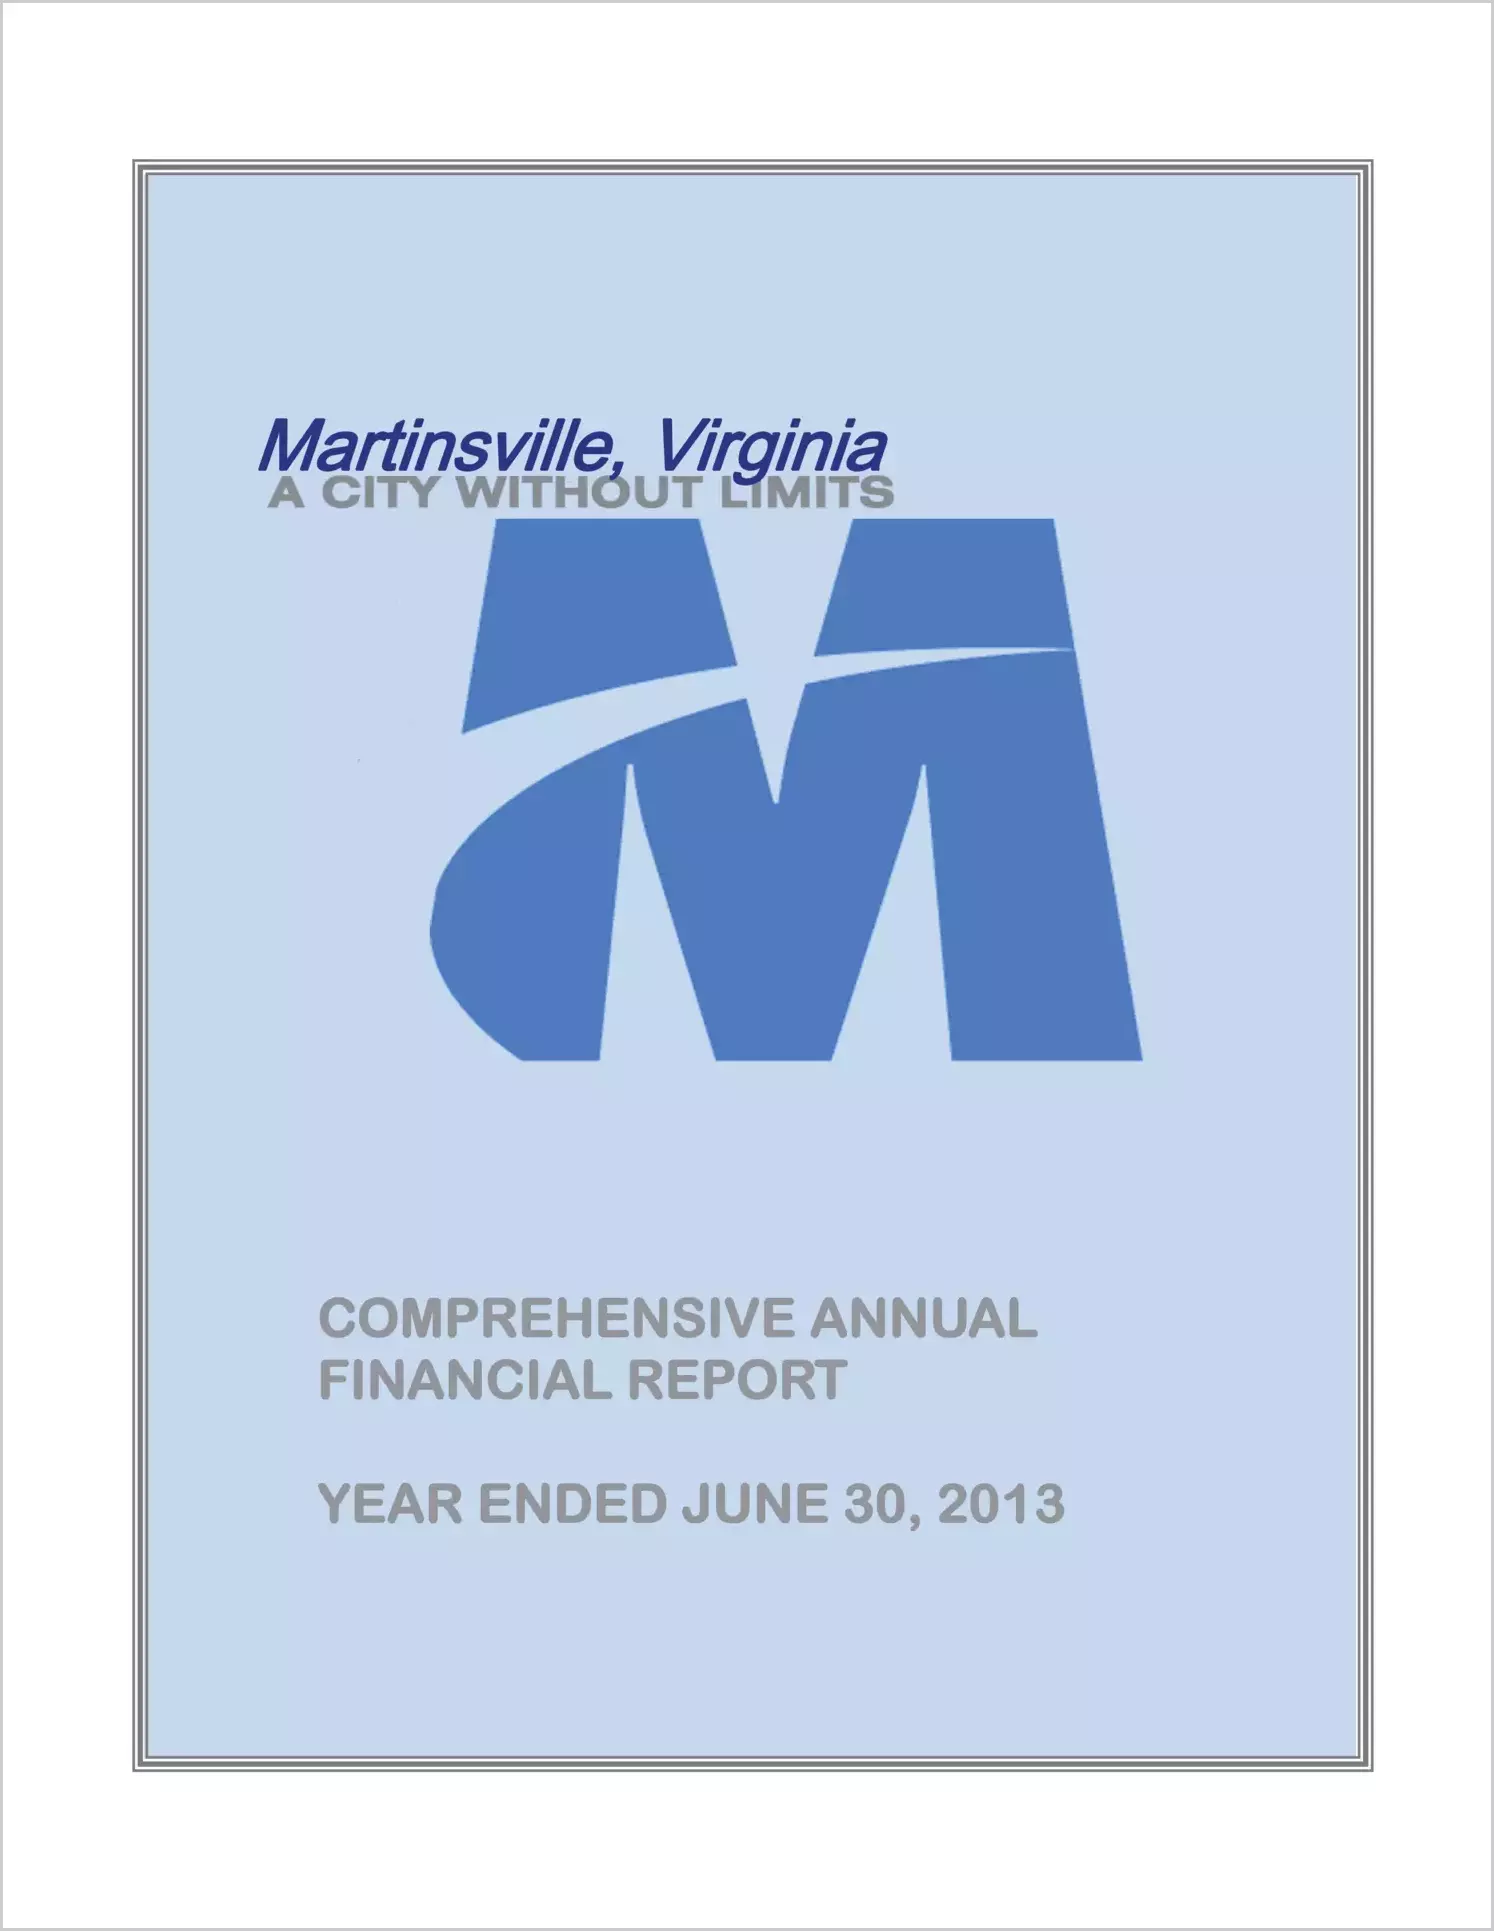 2013 Annual Financial Report for City of Martinsville